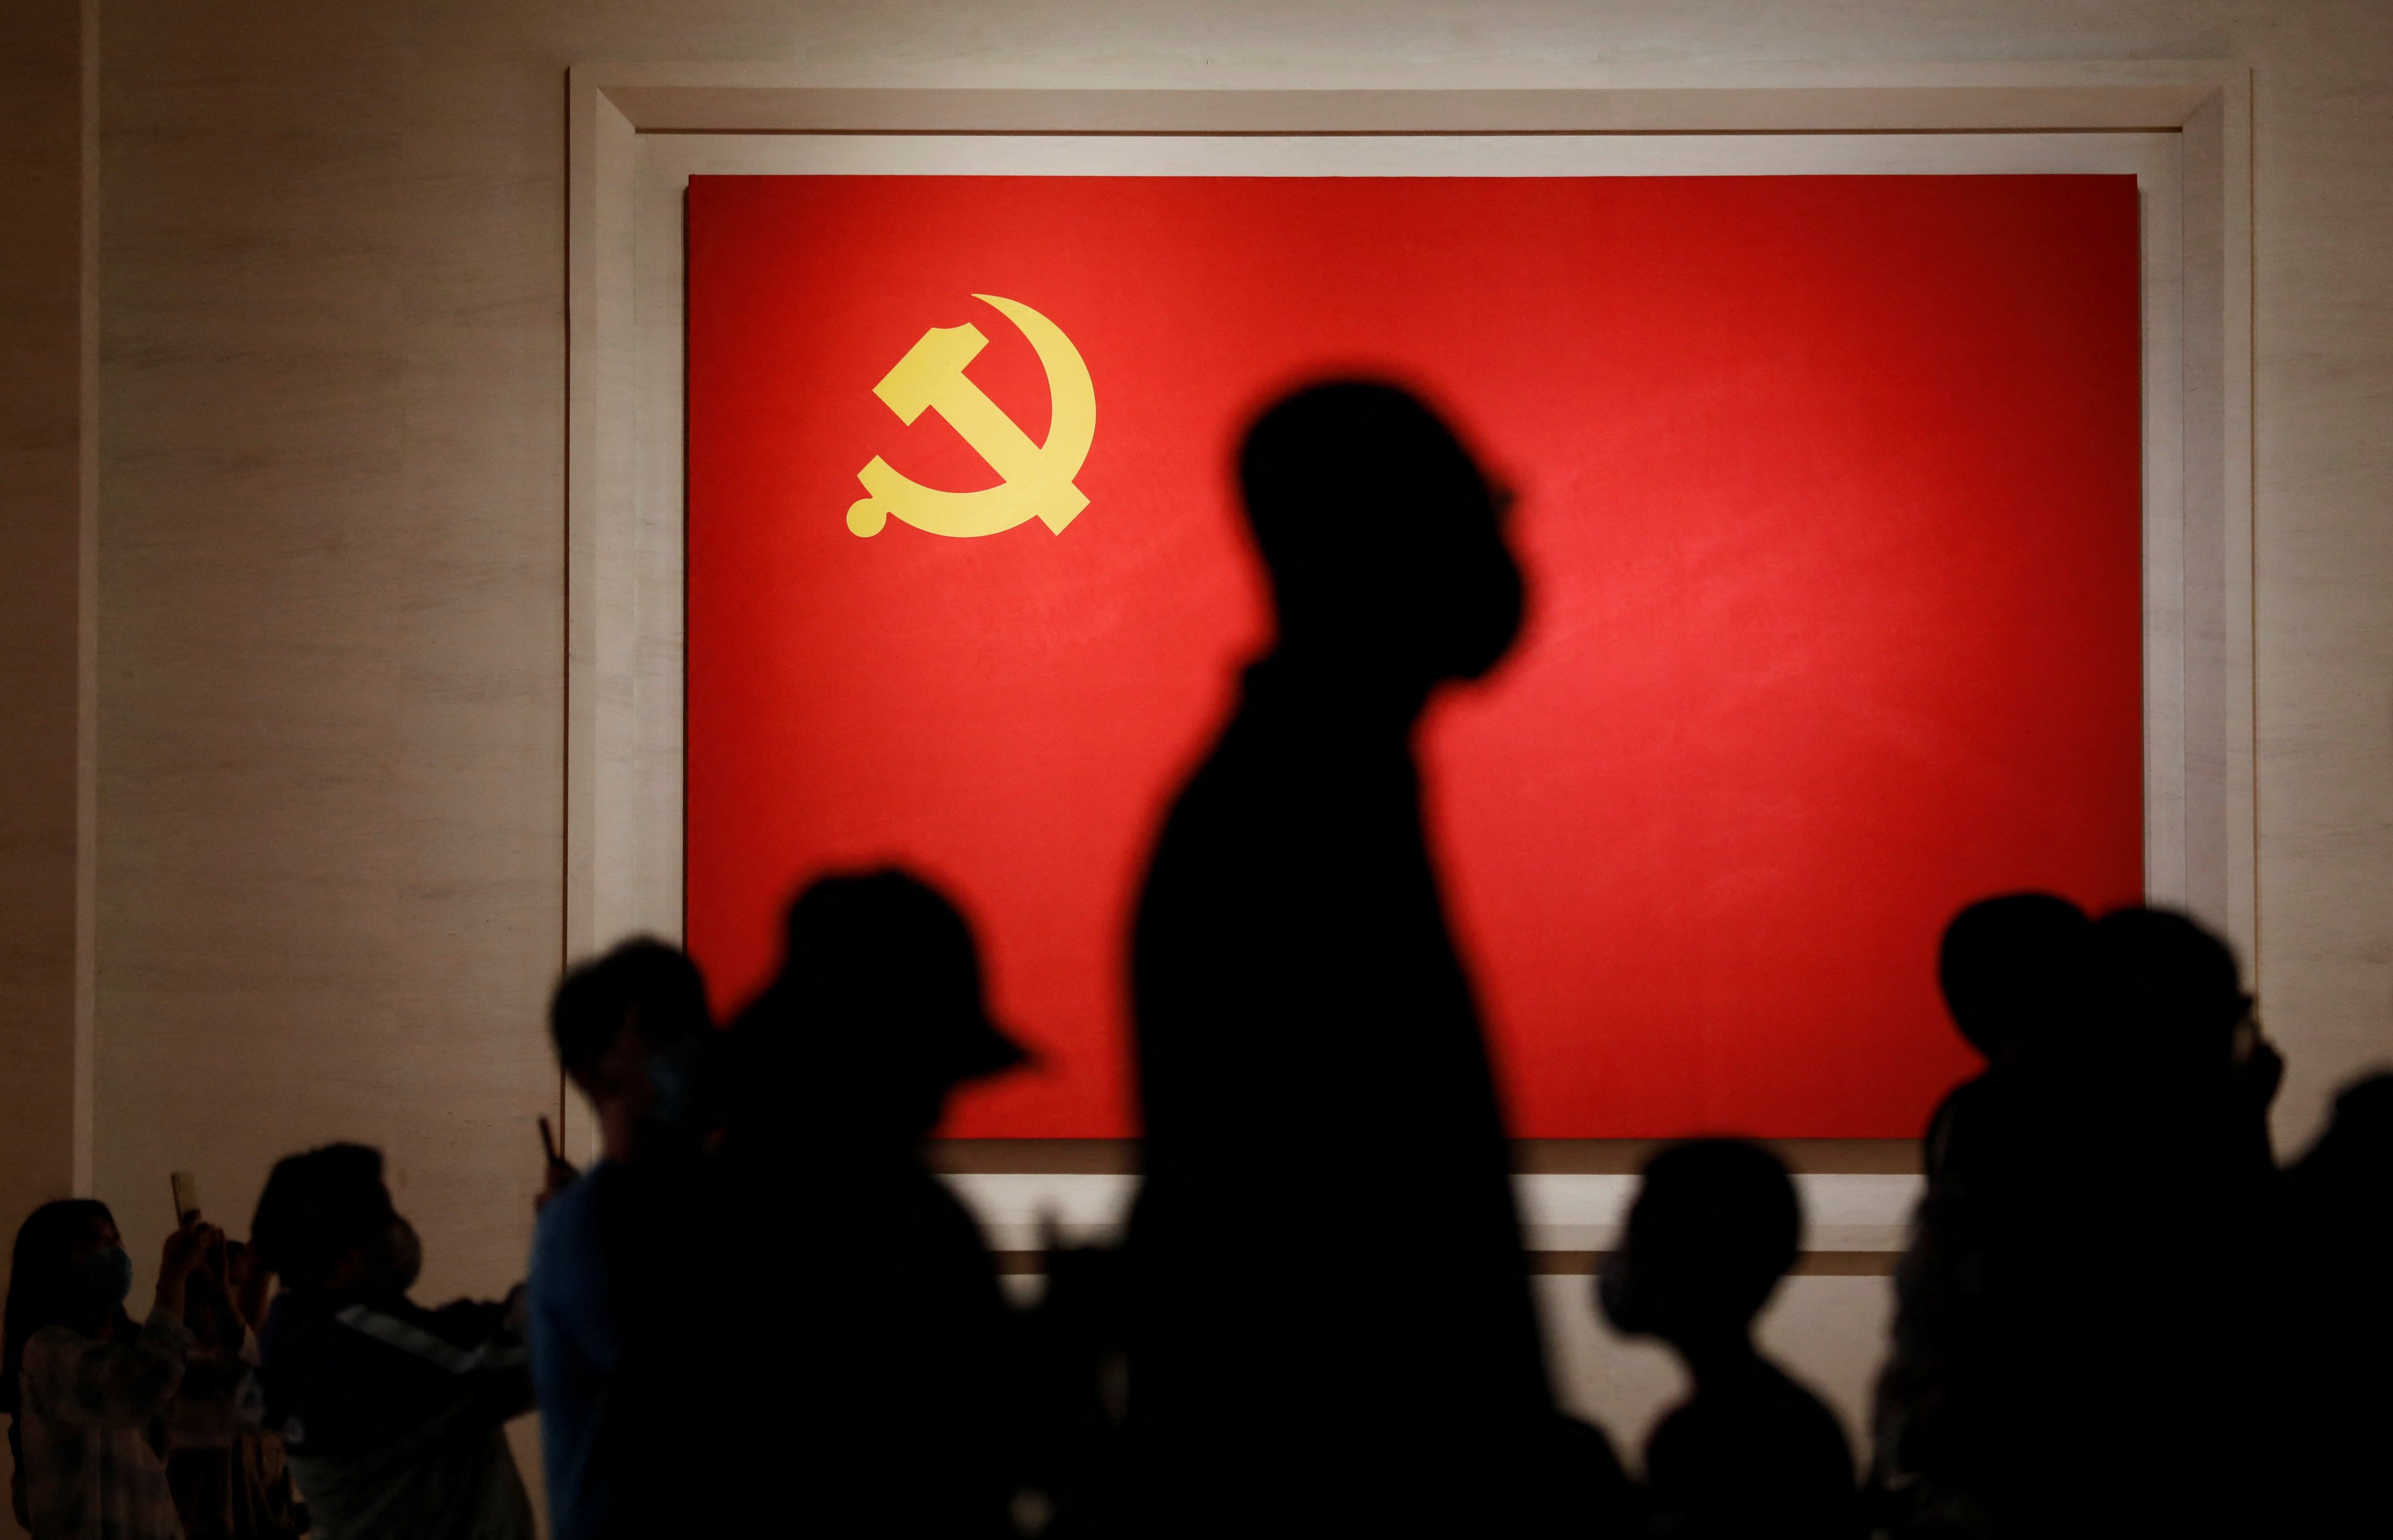 The anti-corruption watchdog said it would “show no mercy to those who form political gangs, cliques and interest groups” within the ruling Communist Party. Photo: Reuters